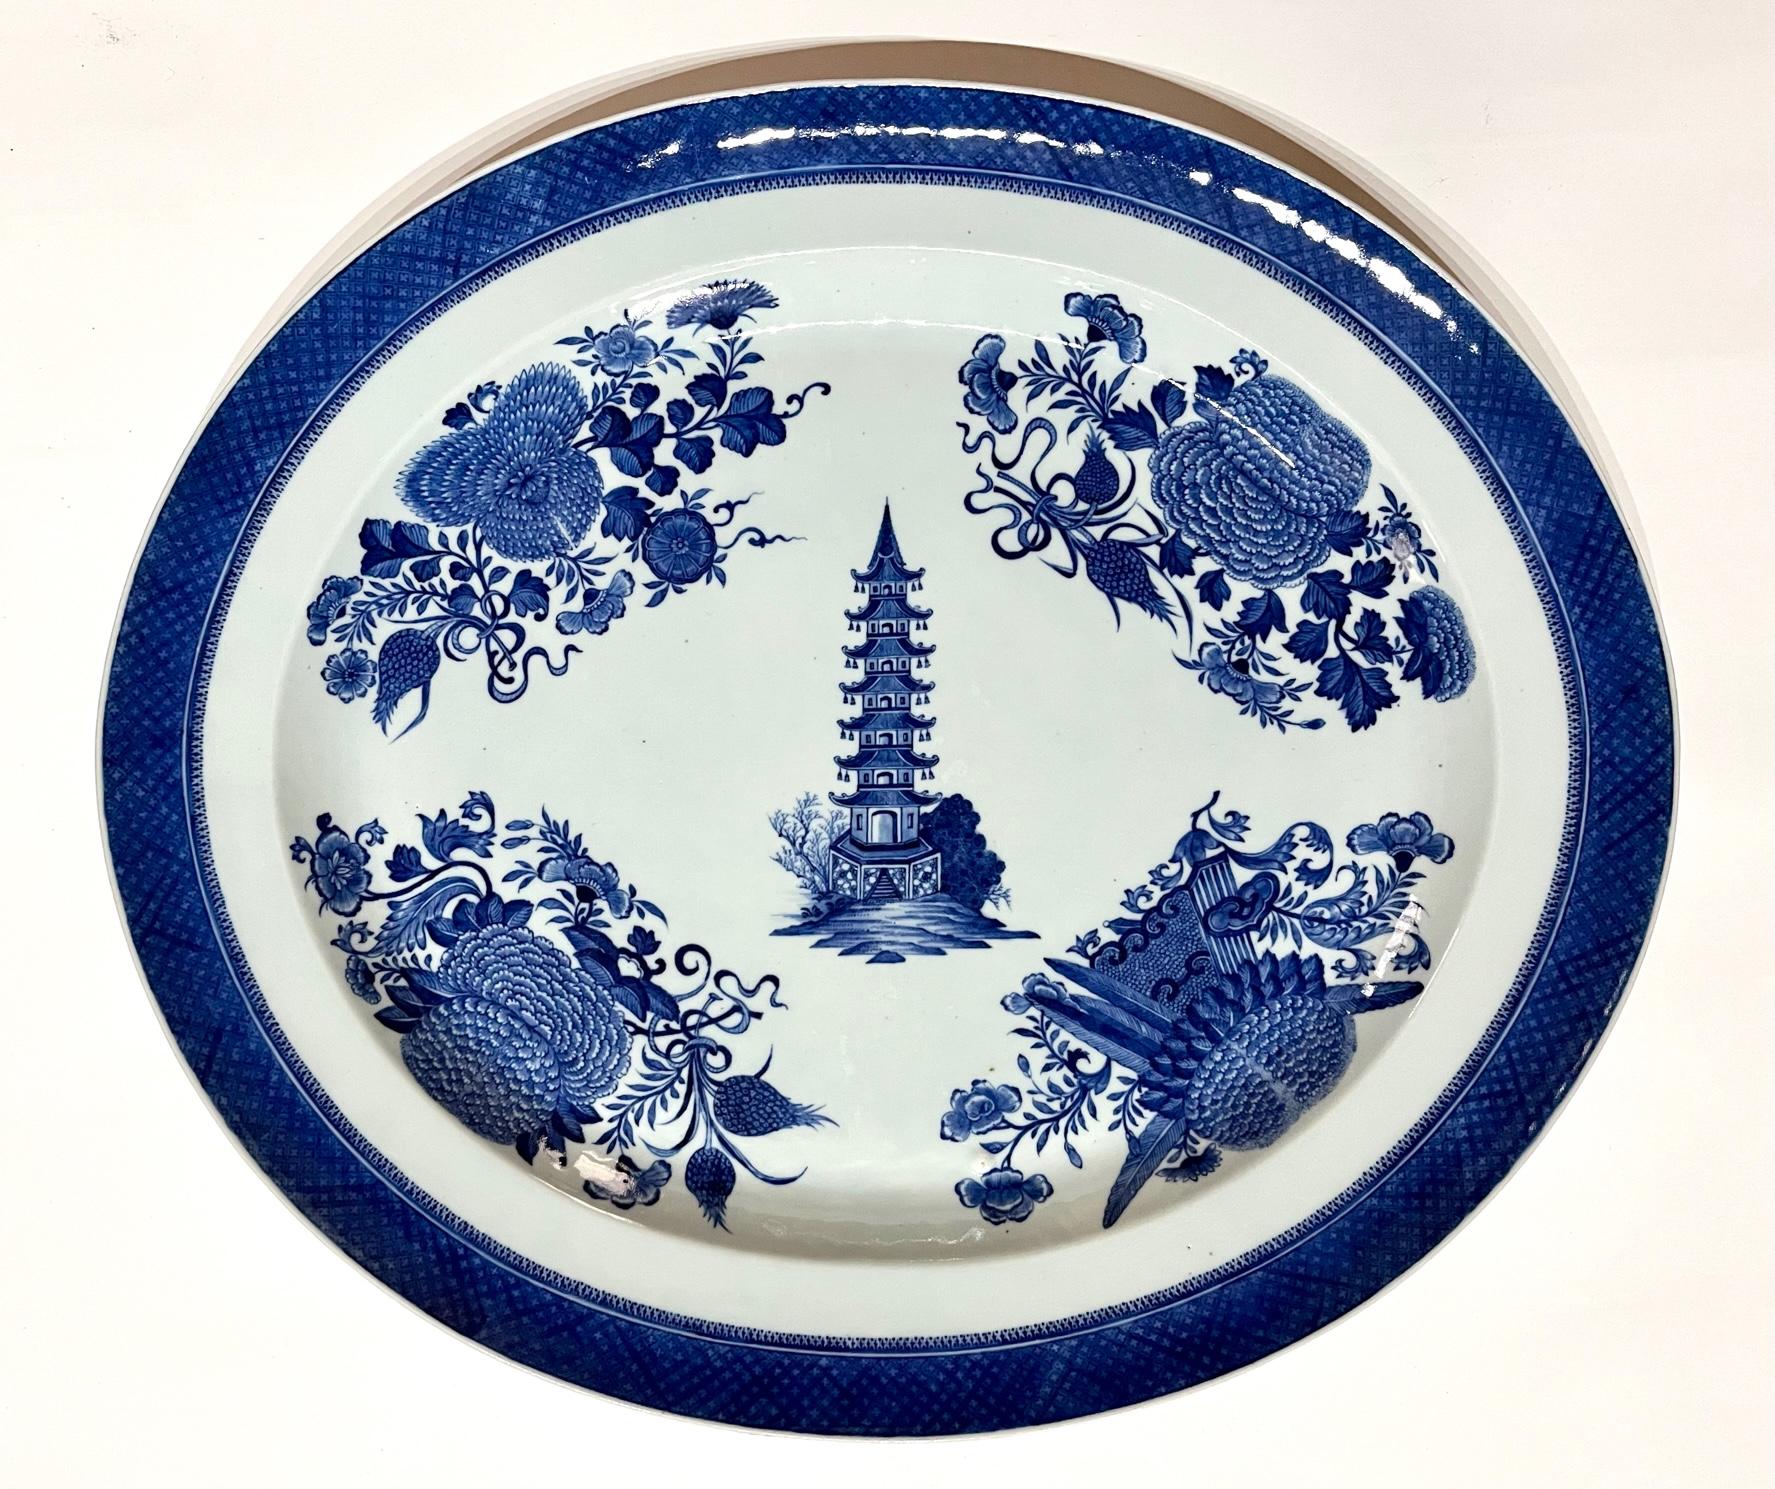 Hand-Crafted Chinese Export 'Blue Fitzhugh' Platters from the Cabot-Perkins Service, c. 1812 For Sale